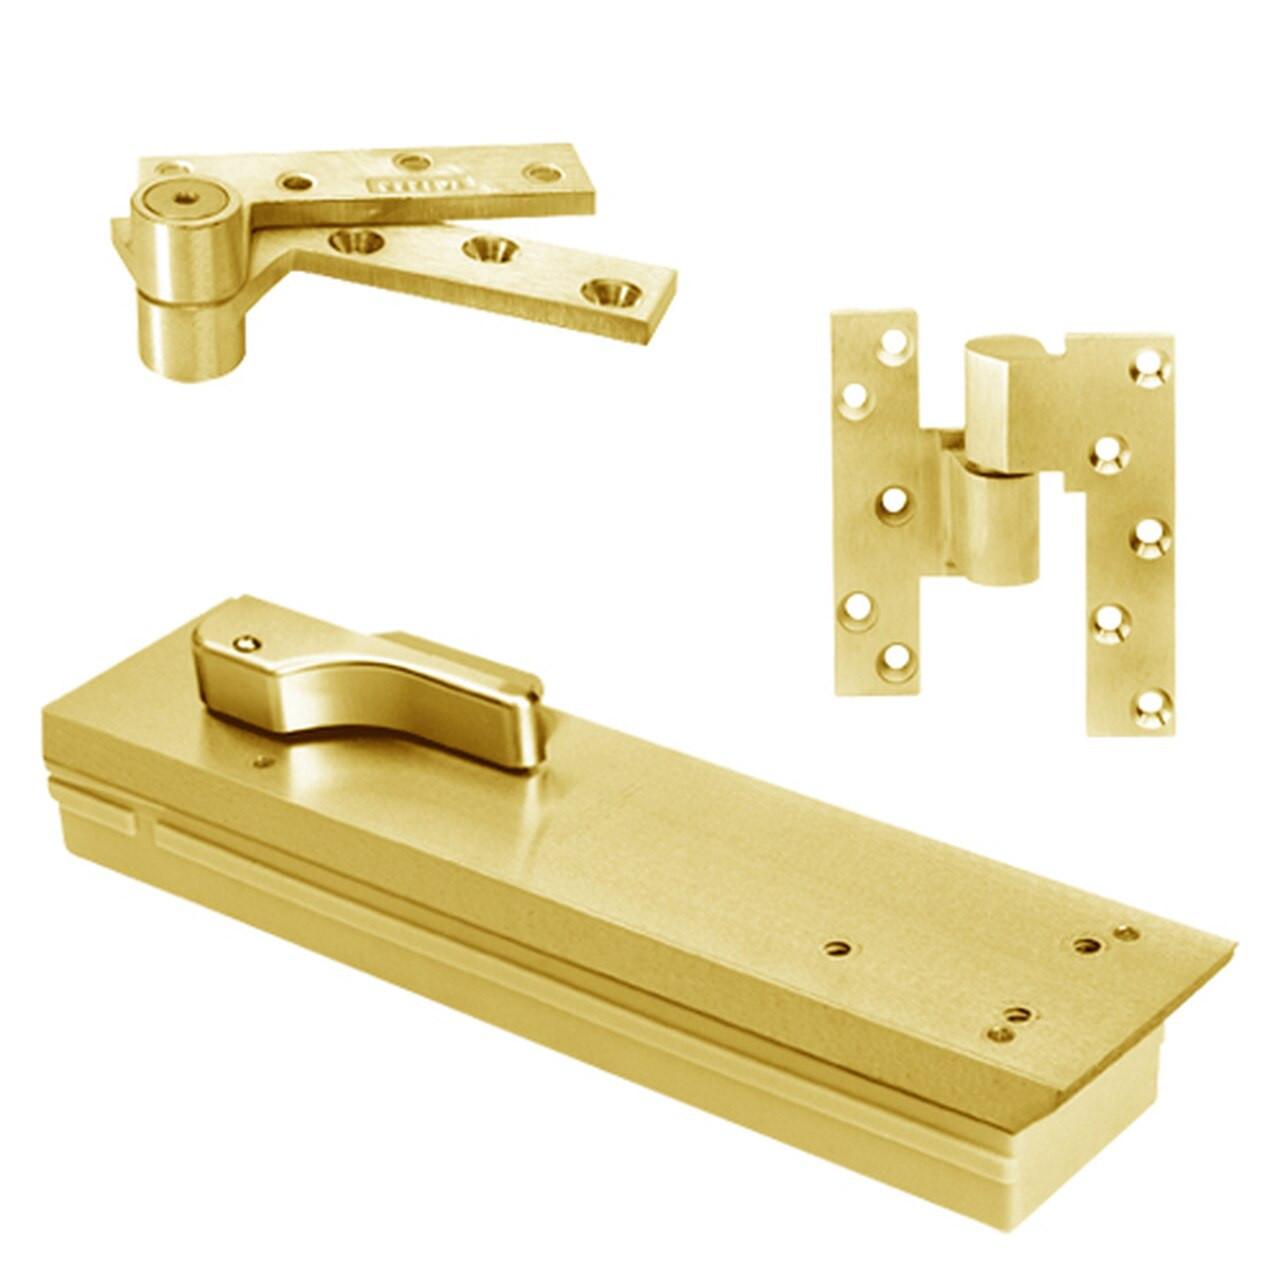 FQ5105NBC-LCC-RH-605 Rixson Q51 Series Fire Rated 3/4" Offset Hung Shallow Depth Floor Closers in Bright Brass Finish